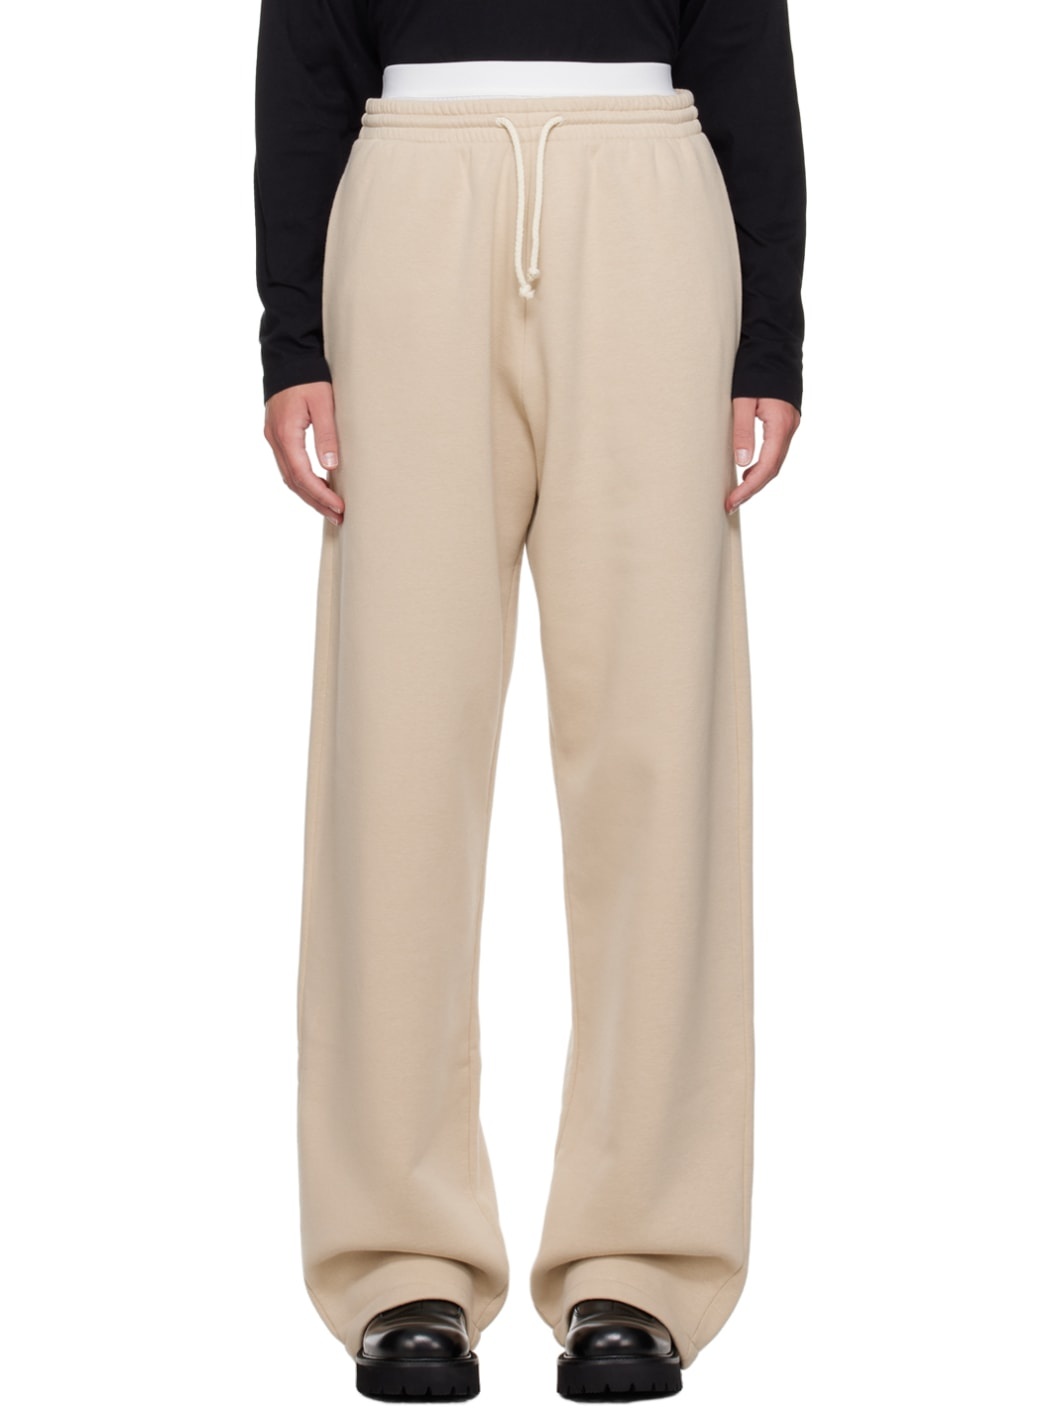 Double jersey drawstring trousers with stitched crease on the leg